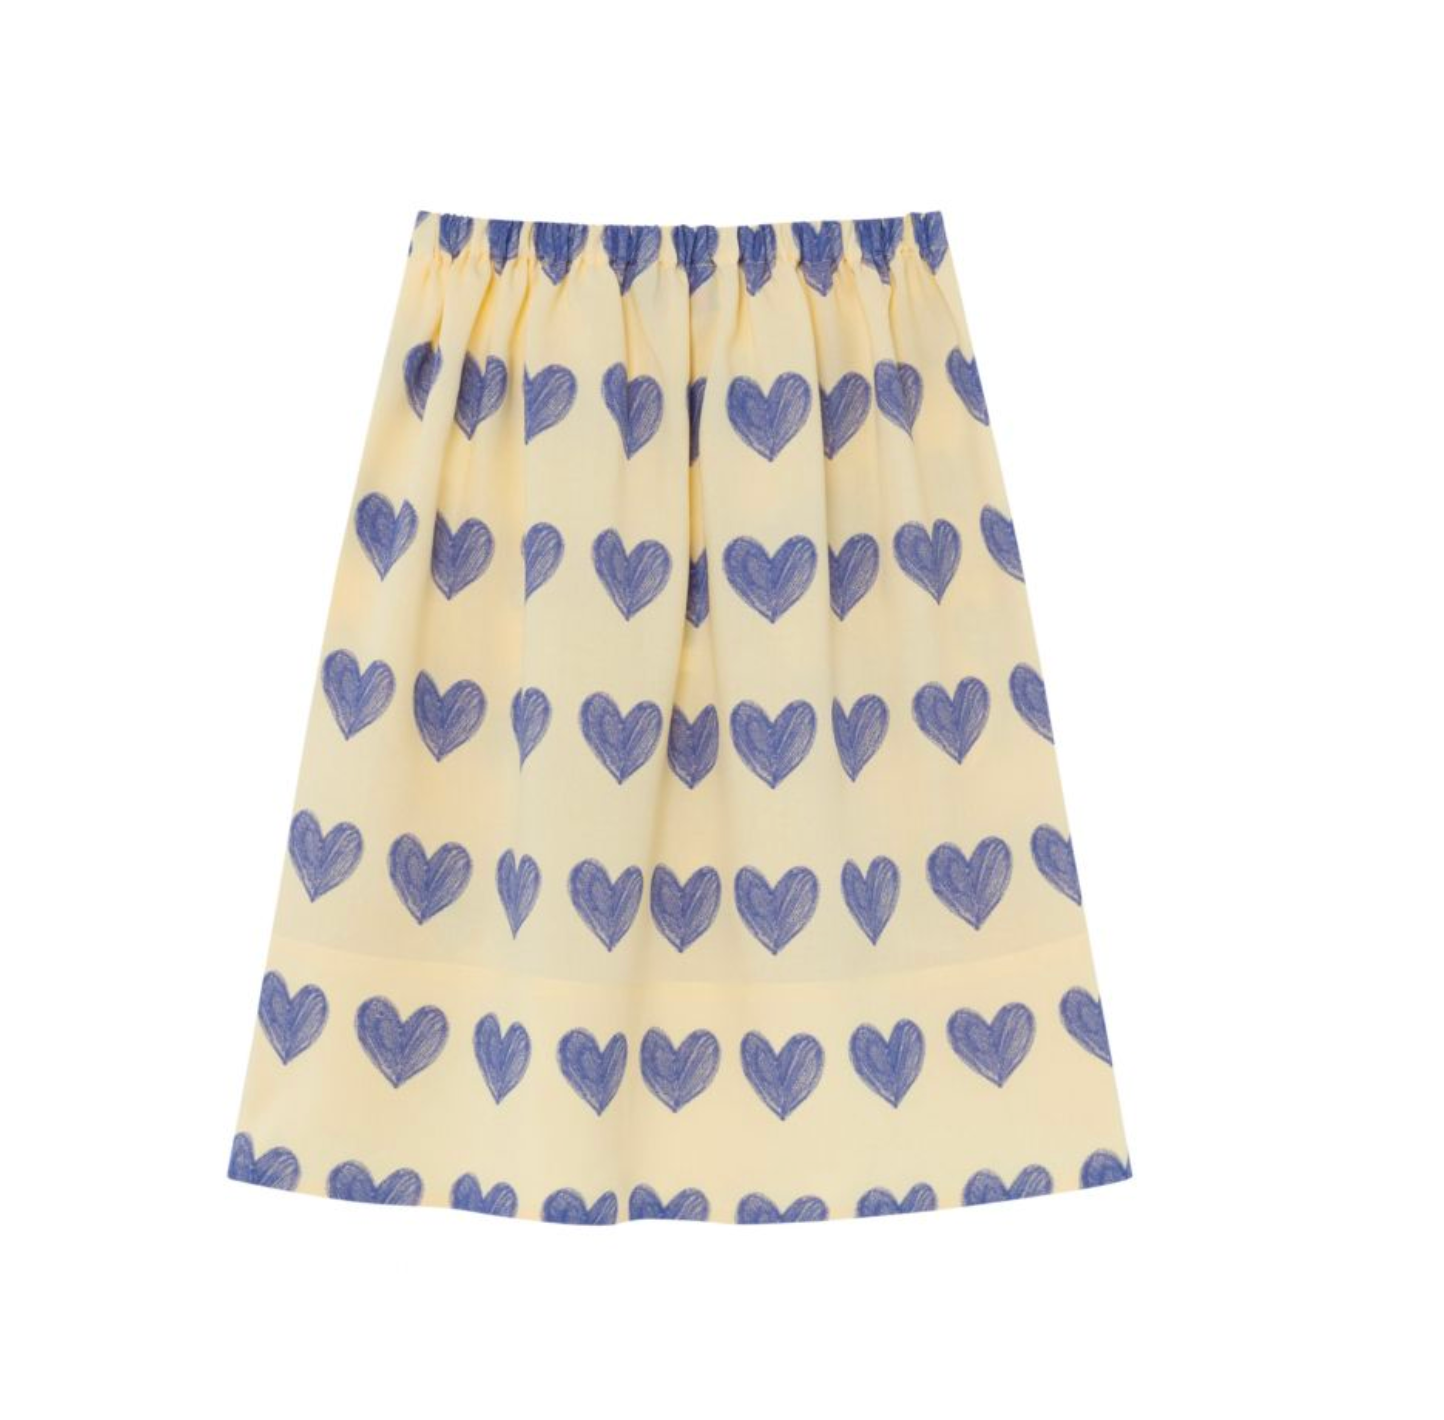 THE ANIMALS OBSERVATORY - Hearts skirt - 2 years old